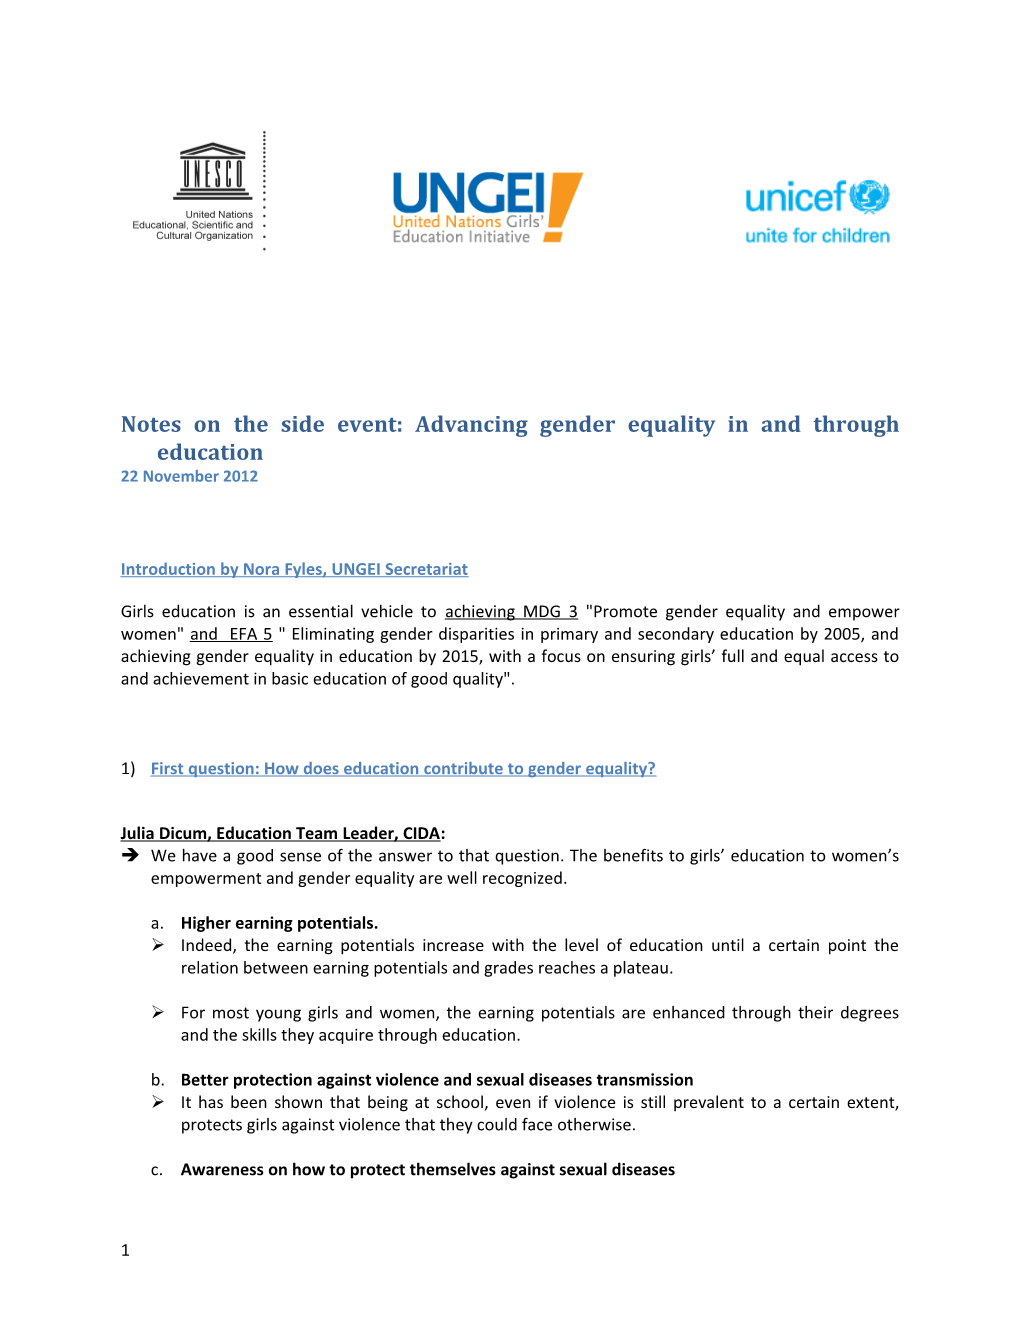 Notes Onthe Side Event: Advancing Gender Equality in and Through Education